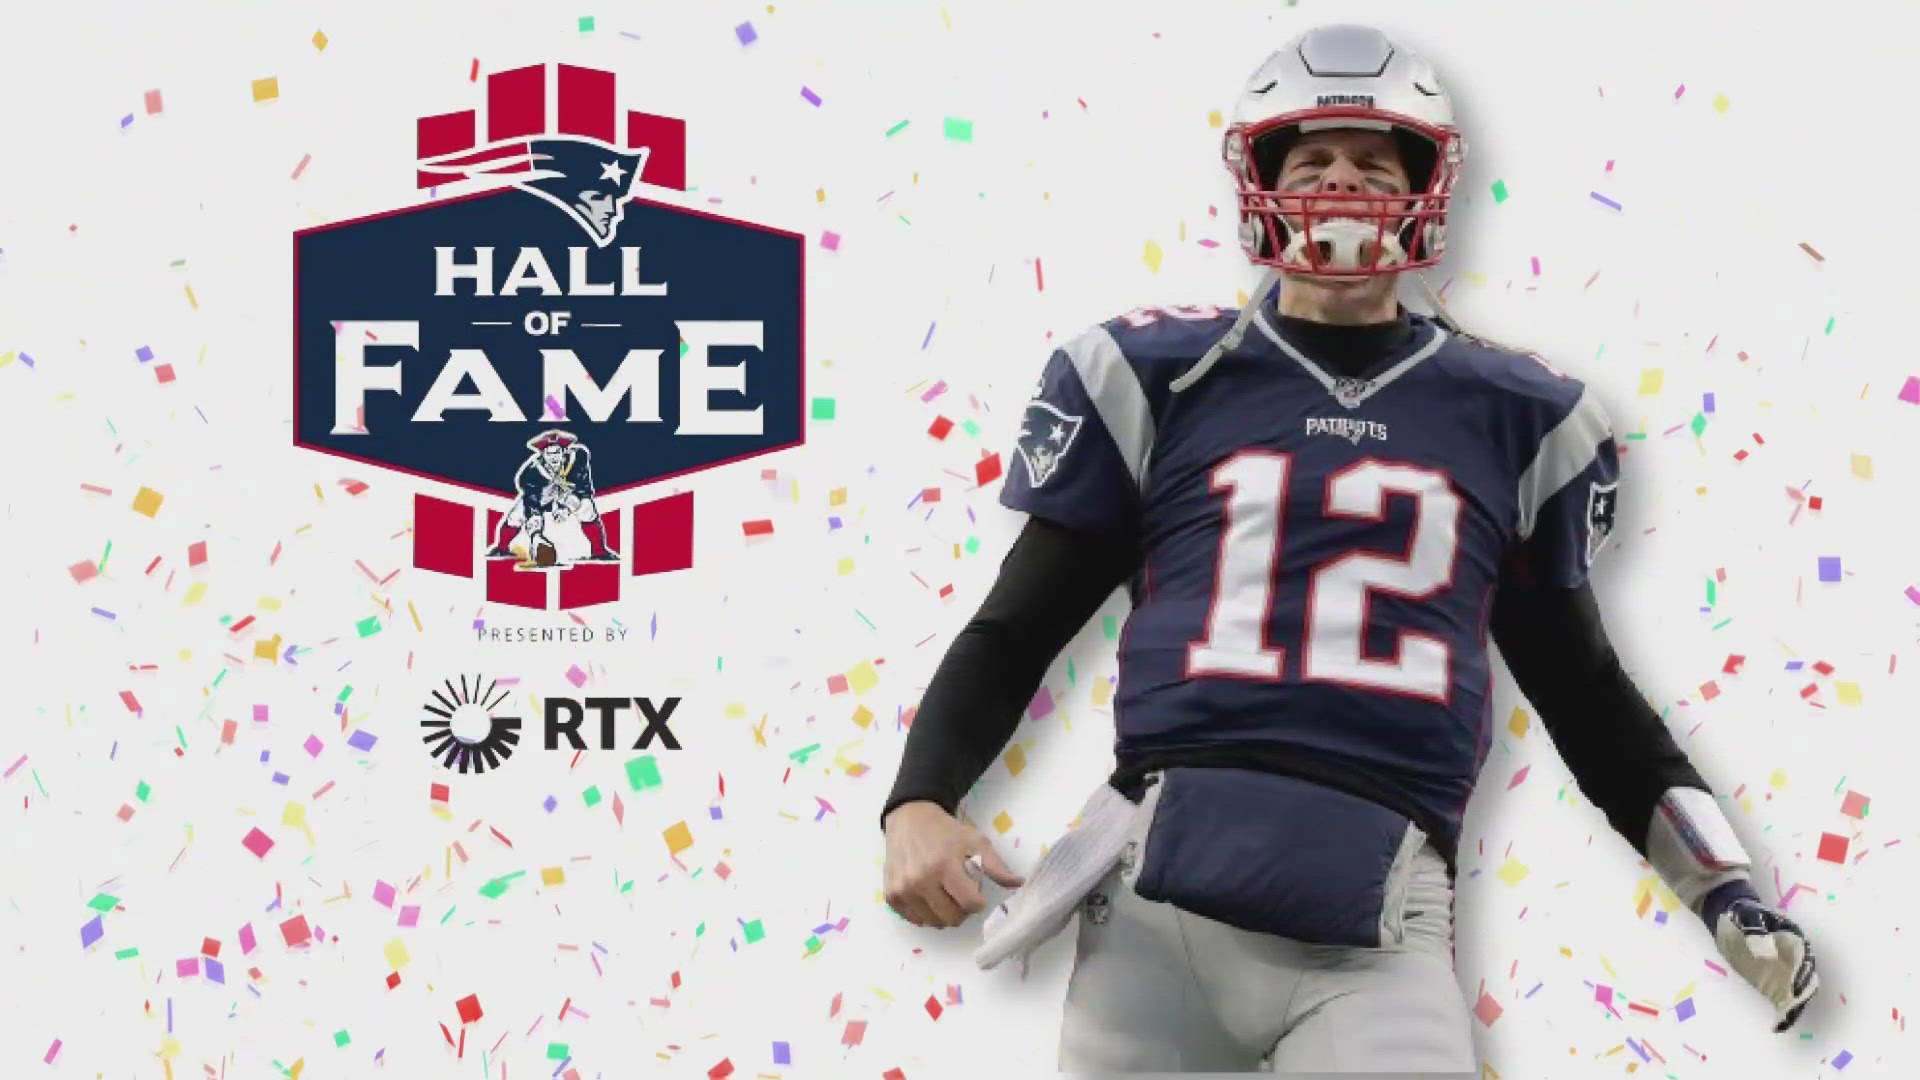 Brady has won six Super Bowl games with the New England Patriots and was being inducted Wednesday into the Hall of Fame ceremony held at Gillette Stadium.